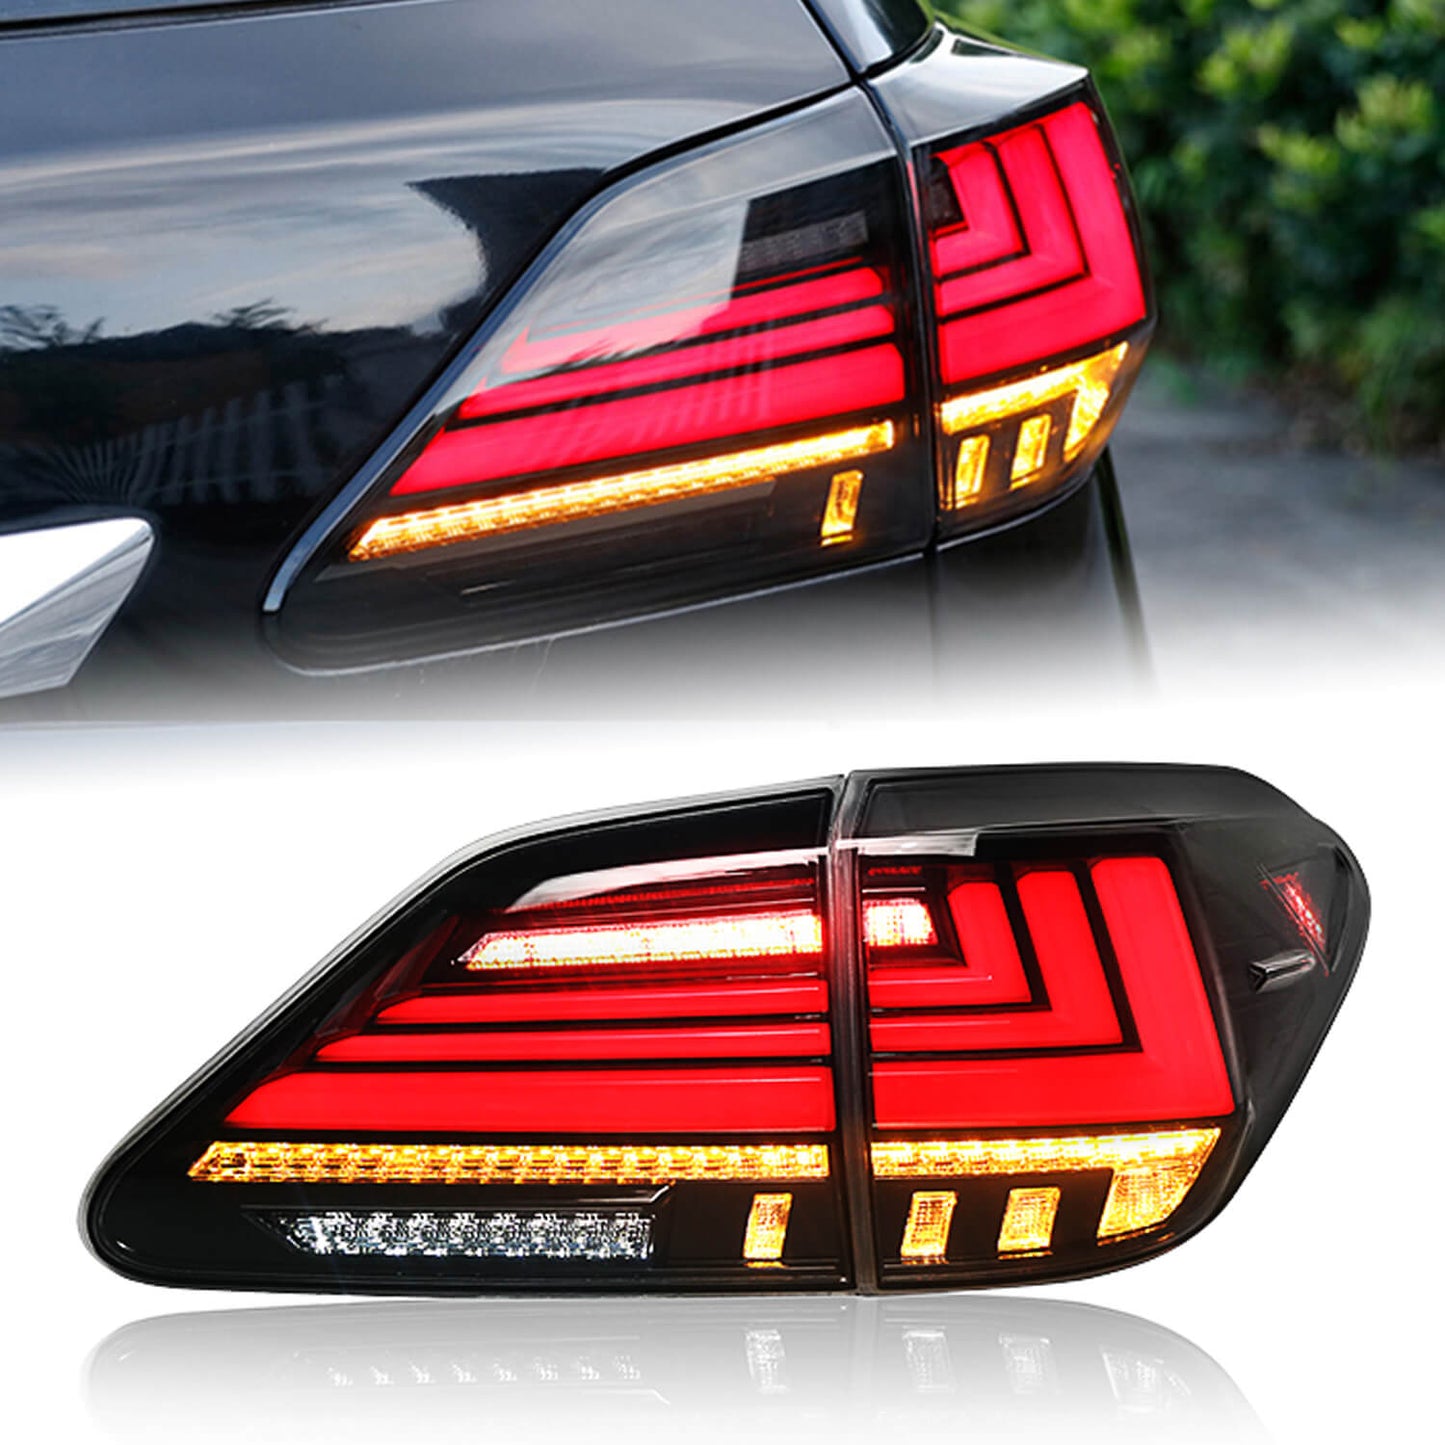 HCMOTION LED Tail Lights for Lexus RX350 RX450 RX270 2009-2015